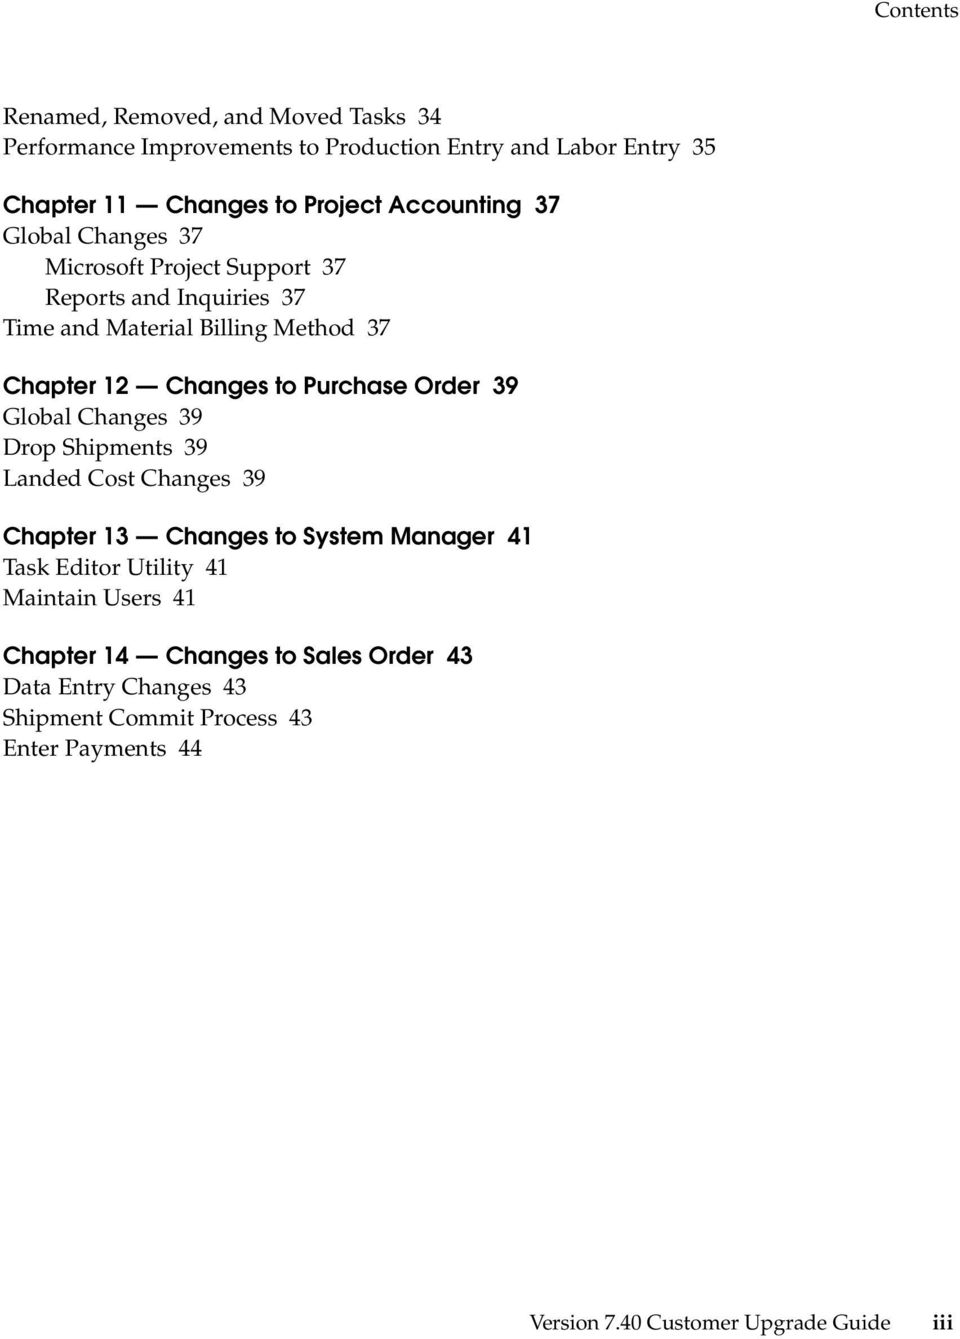 Purchase Order 39 Global Changes 39 Drop Shipments 39 Landed Cost Changes 39 Chapter 13 Changes to System Manager 41 Task Editor Utility 41